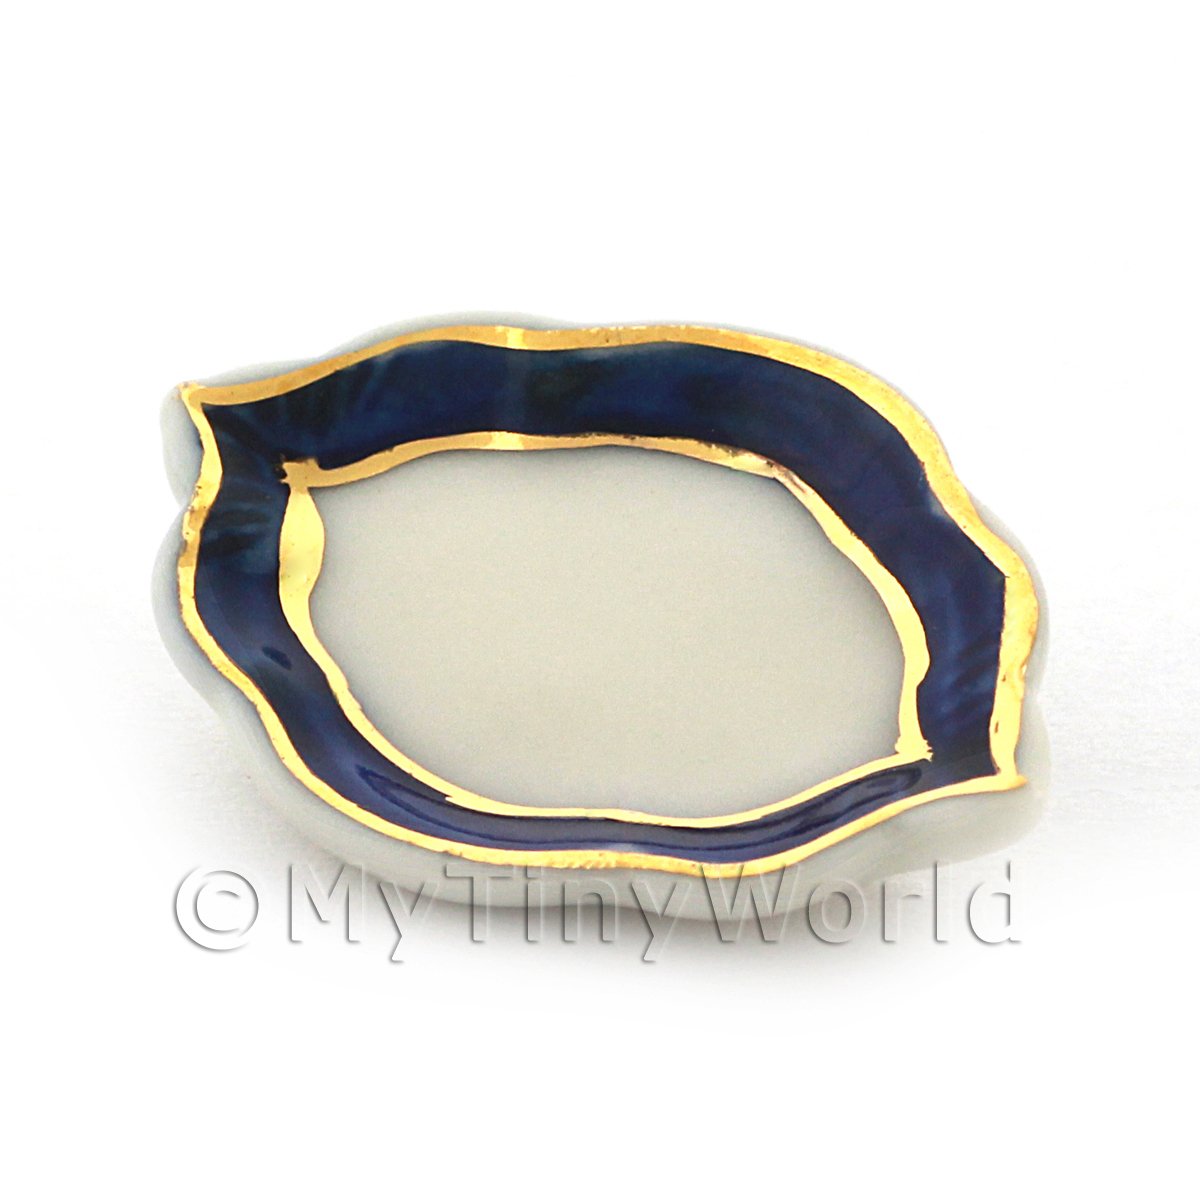 Dolls House Miniature Blue and Metallic Gold 24mm Serving Plate 